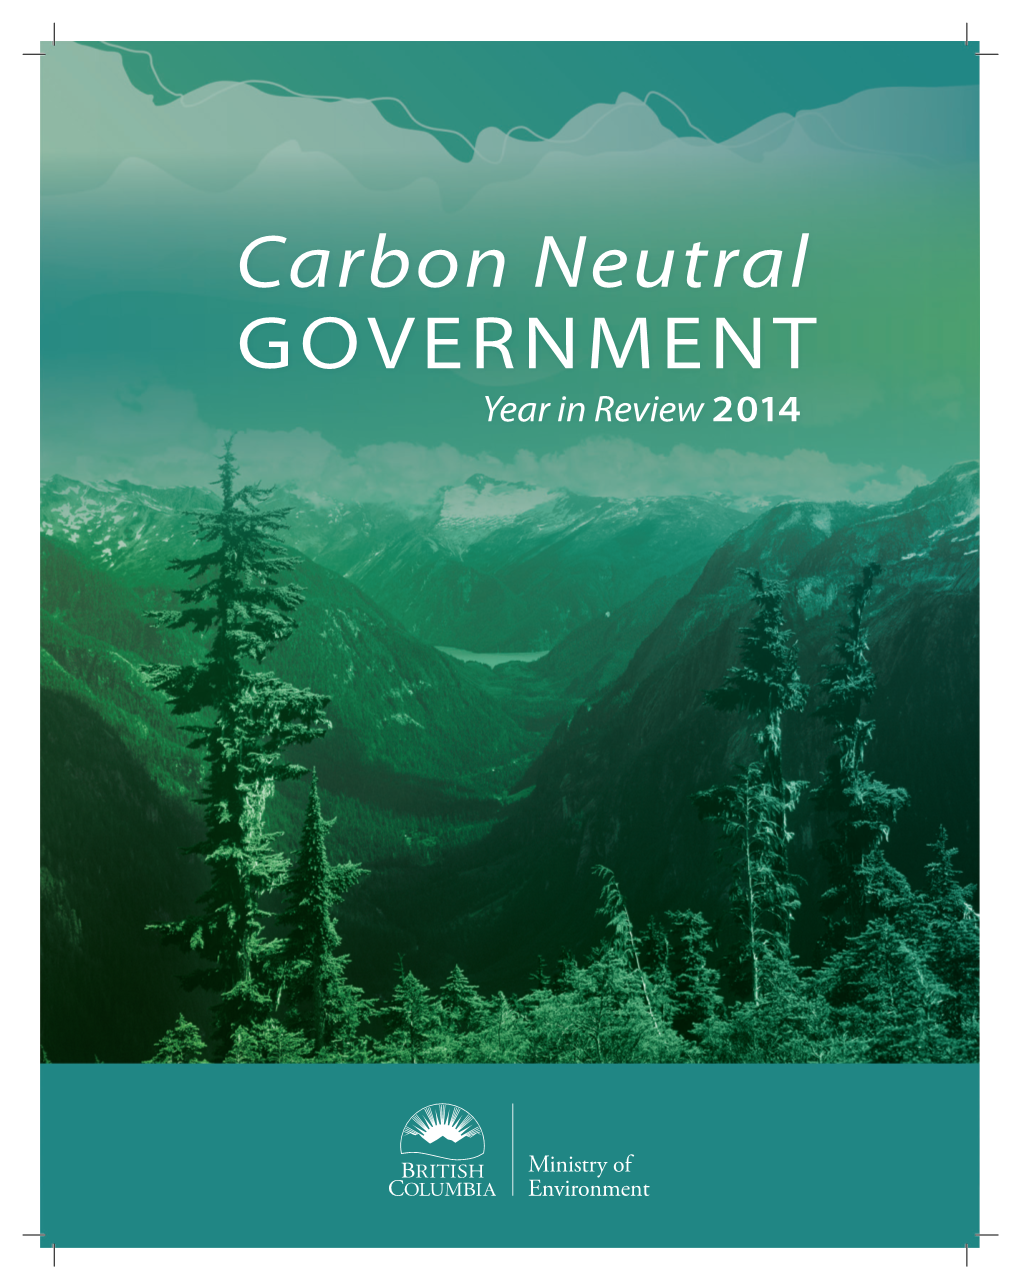 Carbon Neutral GOVERNMENT Year in Review 2014 CARBON NEUTRAL GOVERNMENT | Year in Review 2014